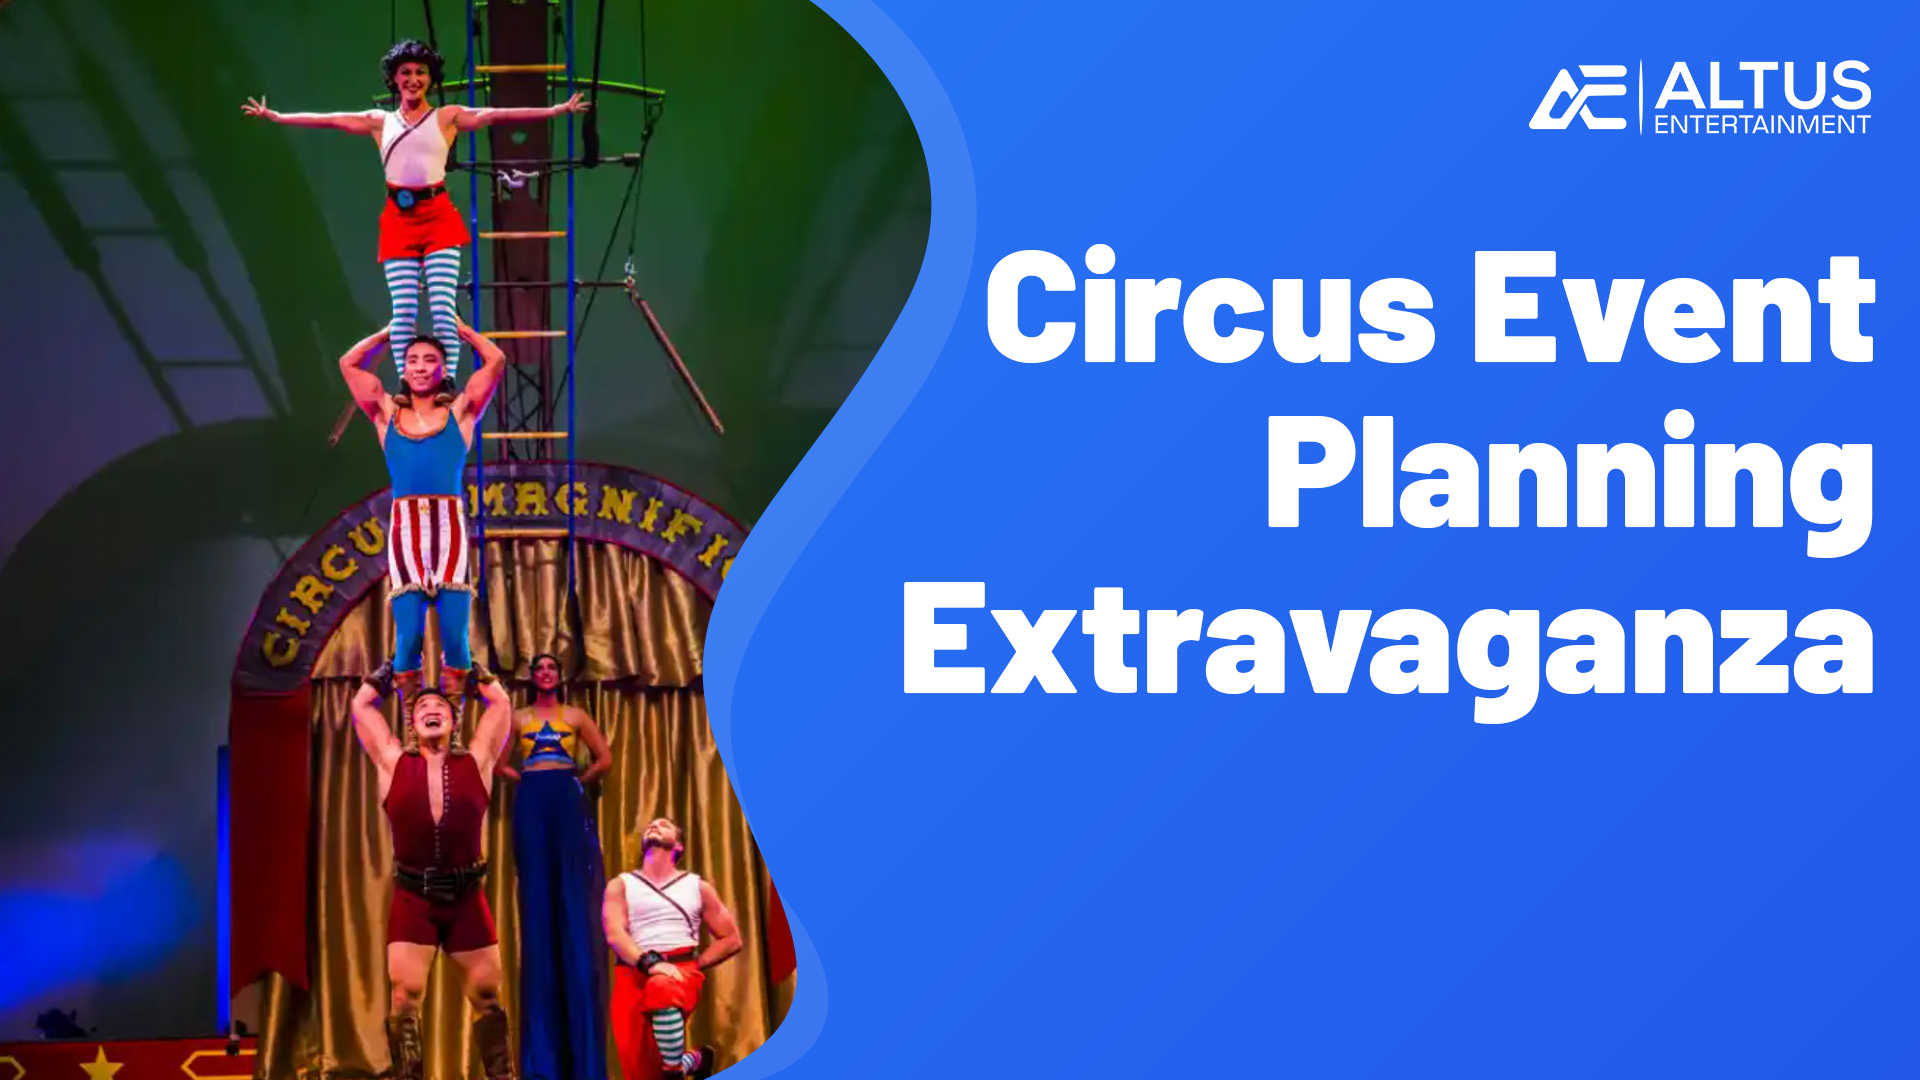 Circus-themed event planning blog